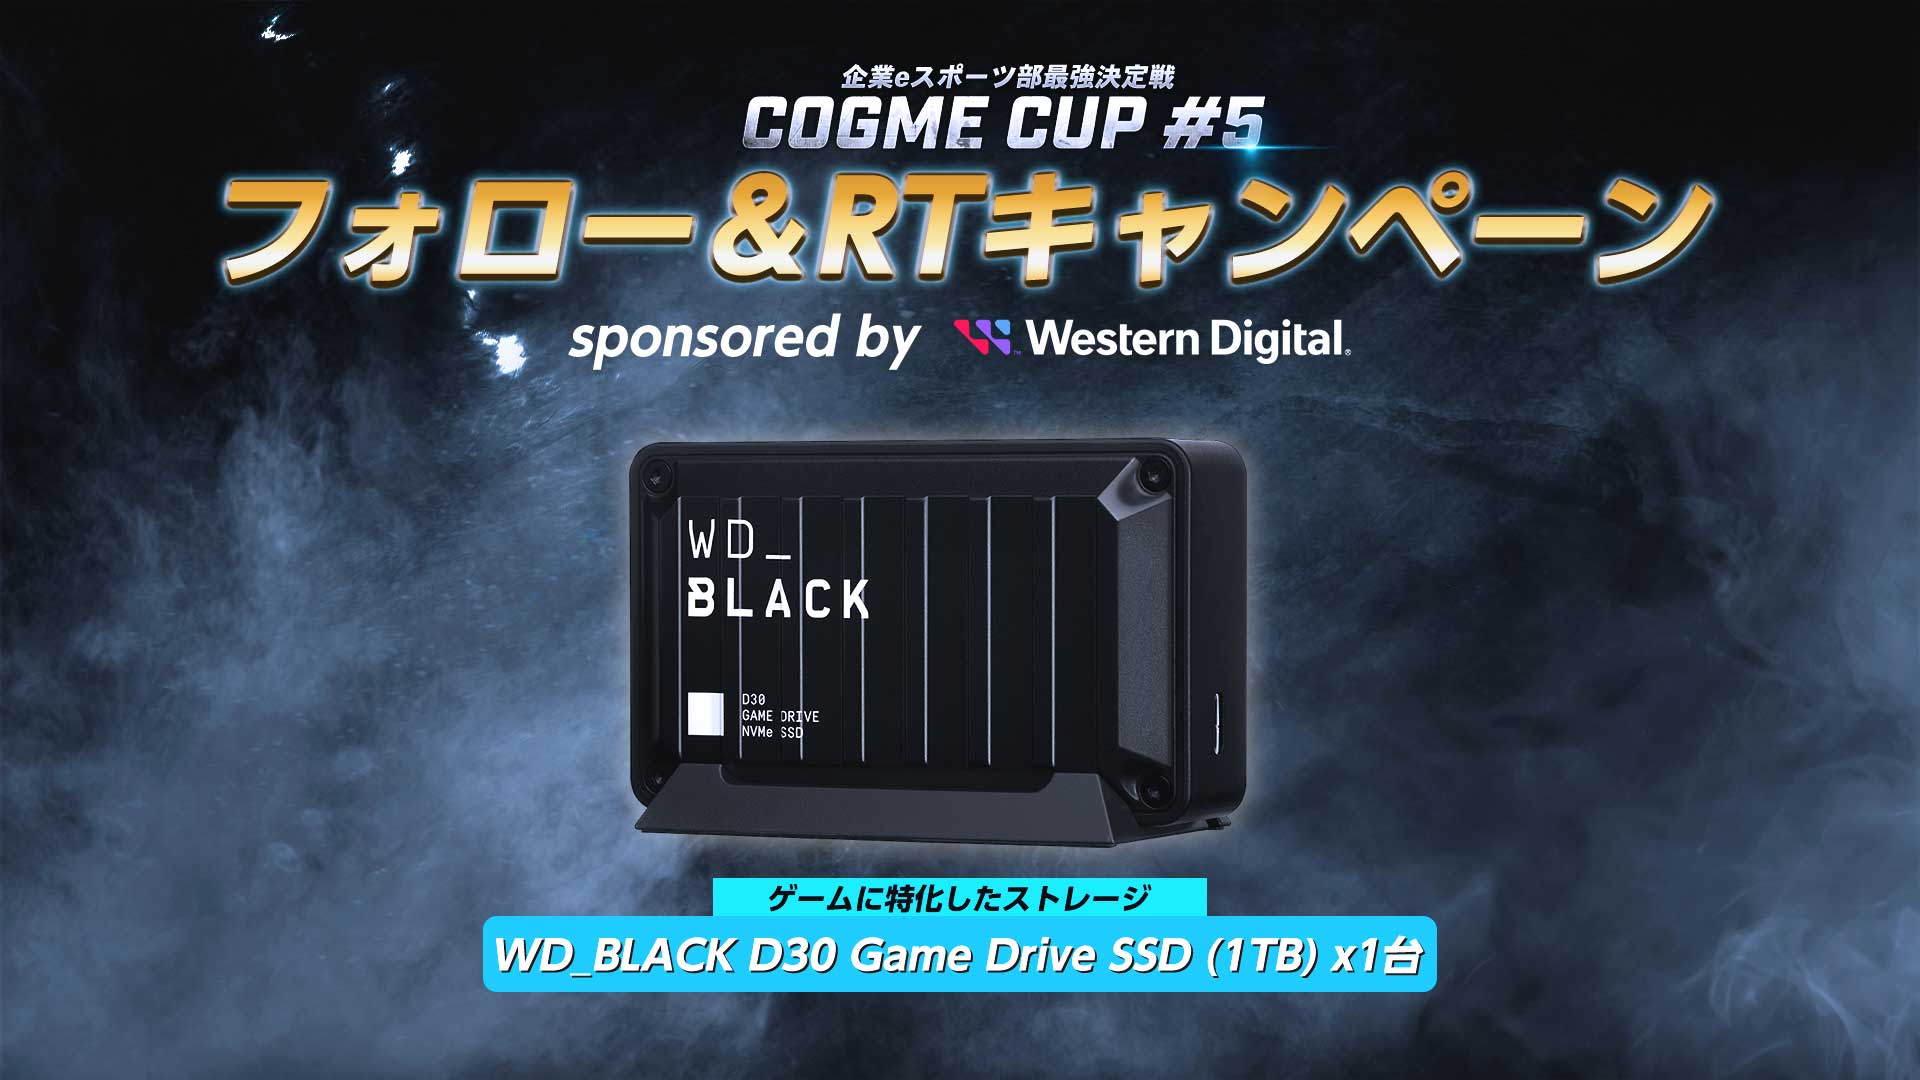 cogme cup #5 開催記念プレゼントキャンペーン | WD_BLACK D30 Game Drive SSD（1TB）を1名様にプレゼント